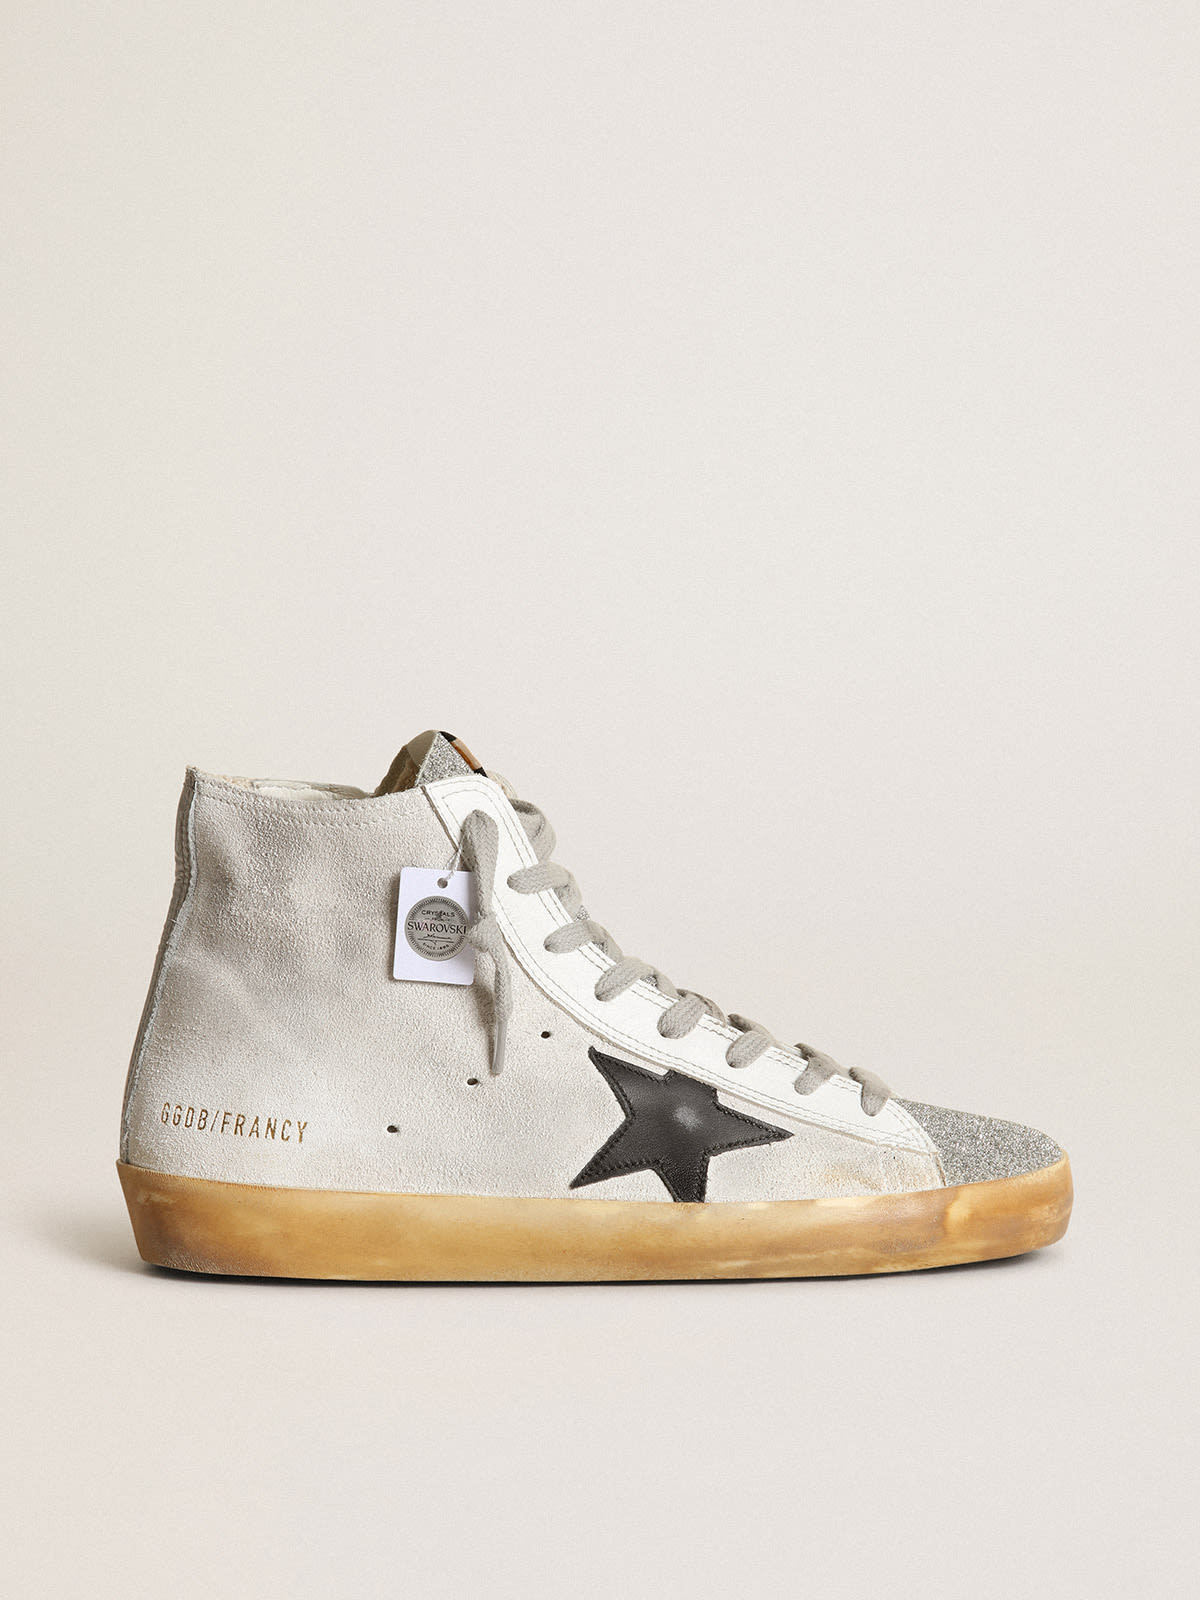 dok vernieuwen Maand Francy sneakers in white suede with tongue in Swarovski micro-crystals and  black leather star | Golden Goose